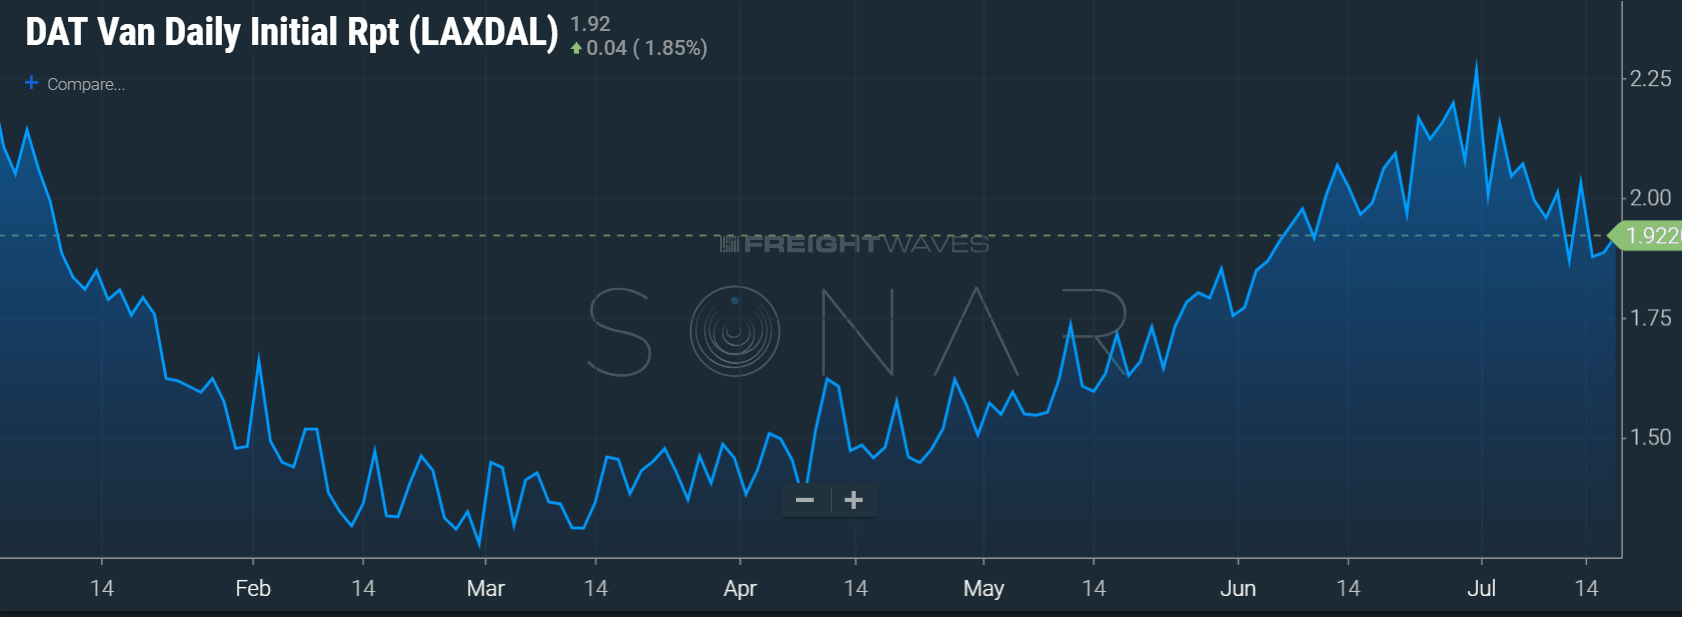  Image: SONAR showing YTD chart of the DAT rate from L.A. to Dallas 